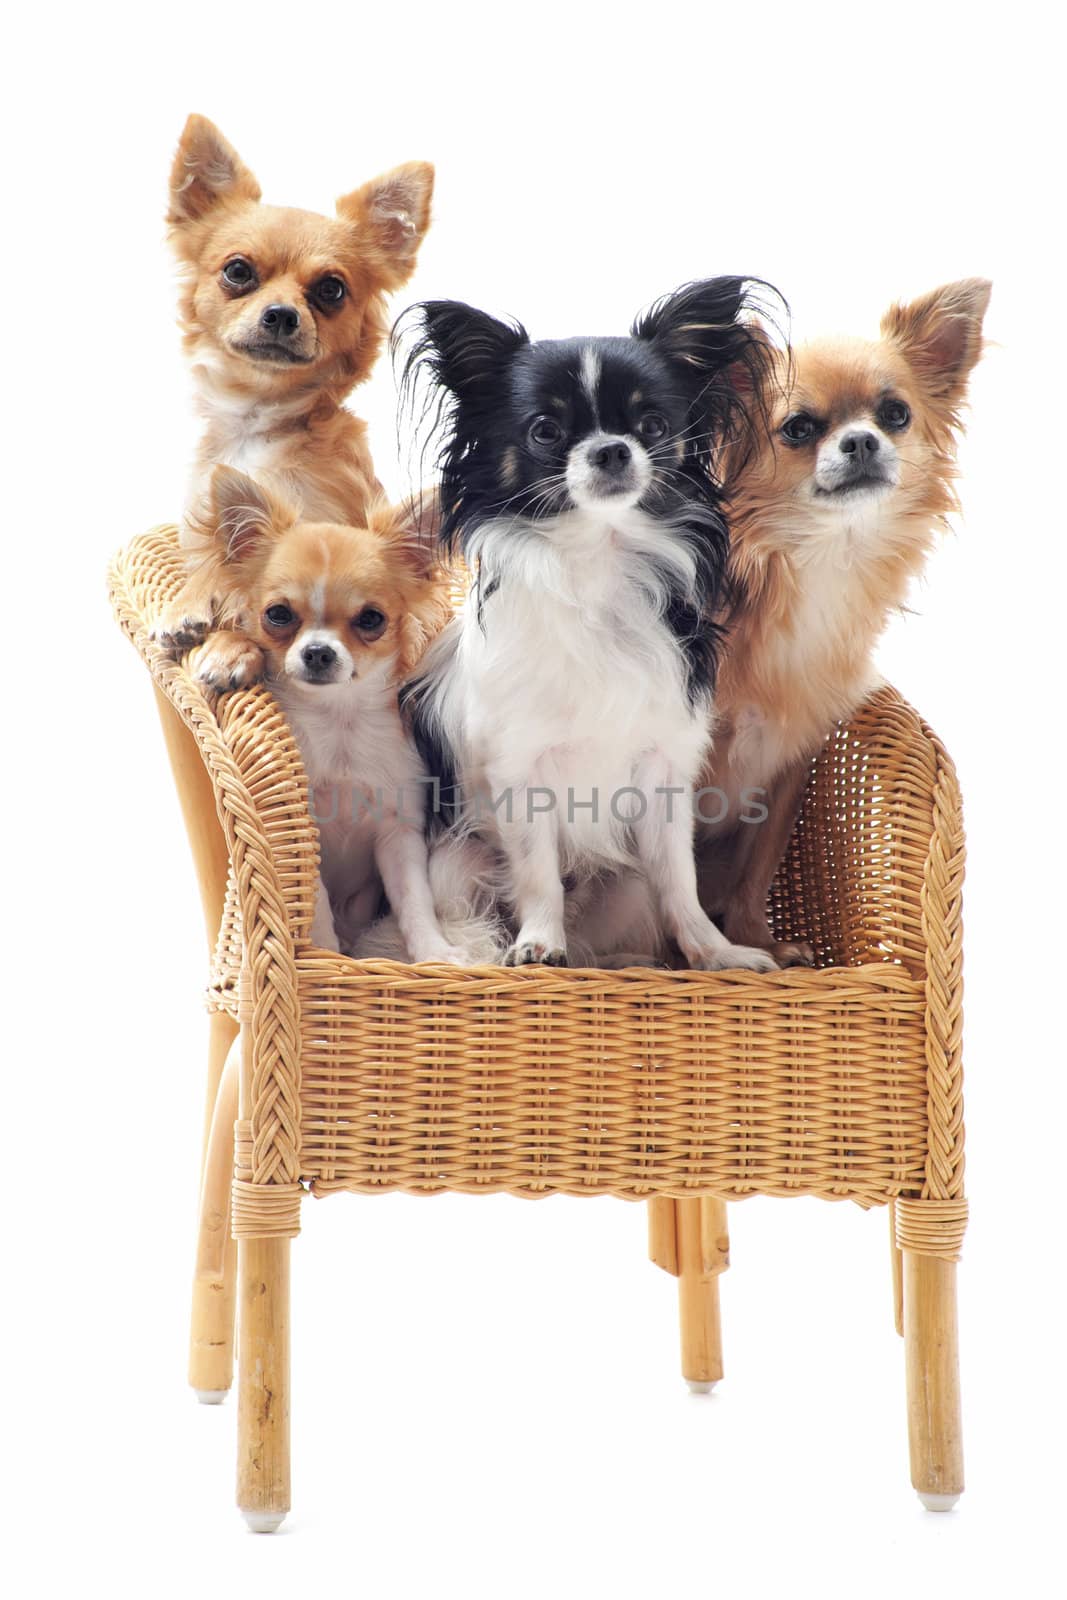 four chihuahuas on a chair in front of white background